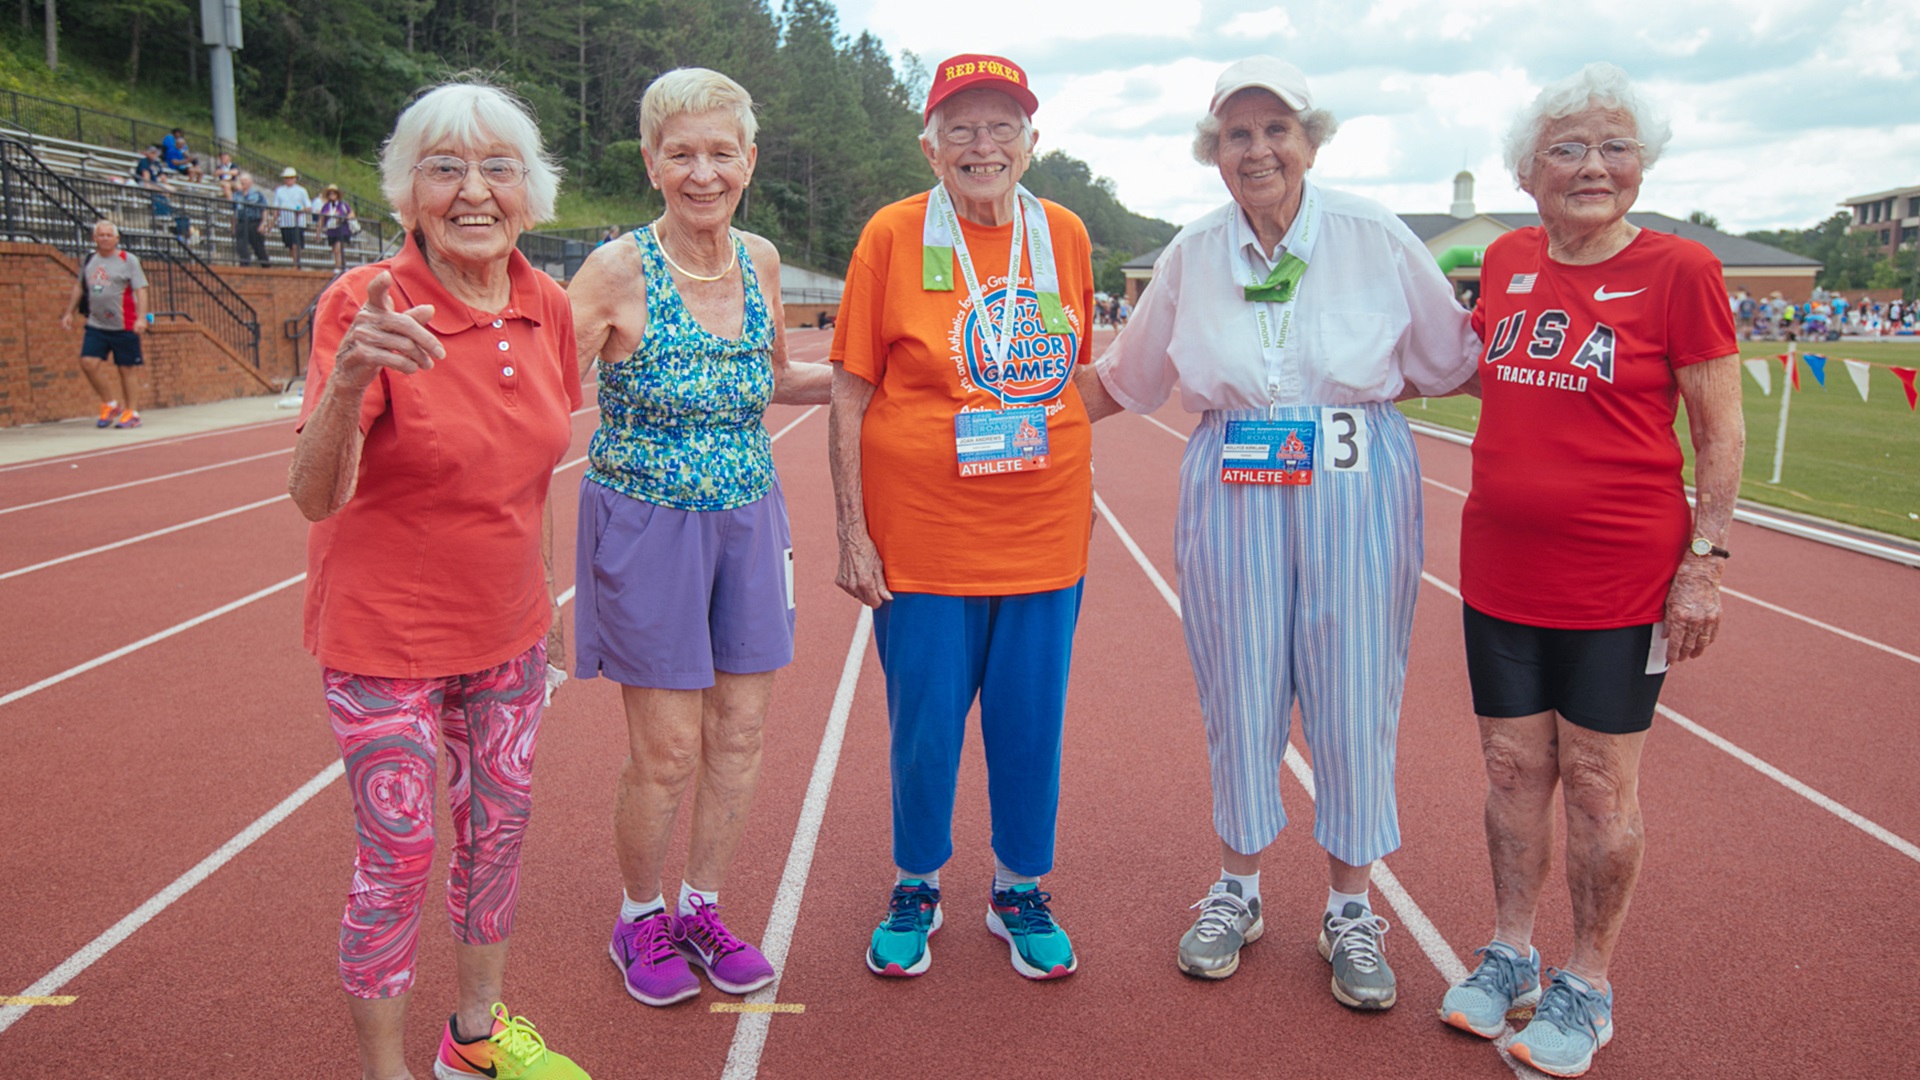 Joan Andrews wins three medals in the Senior Games. Photo courtesy of National Senior Games Association